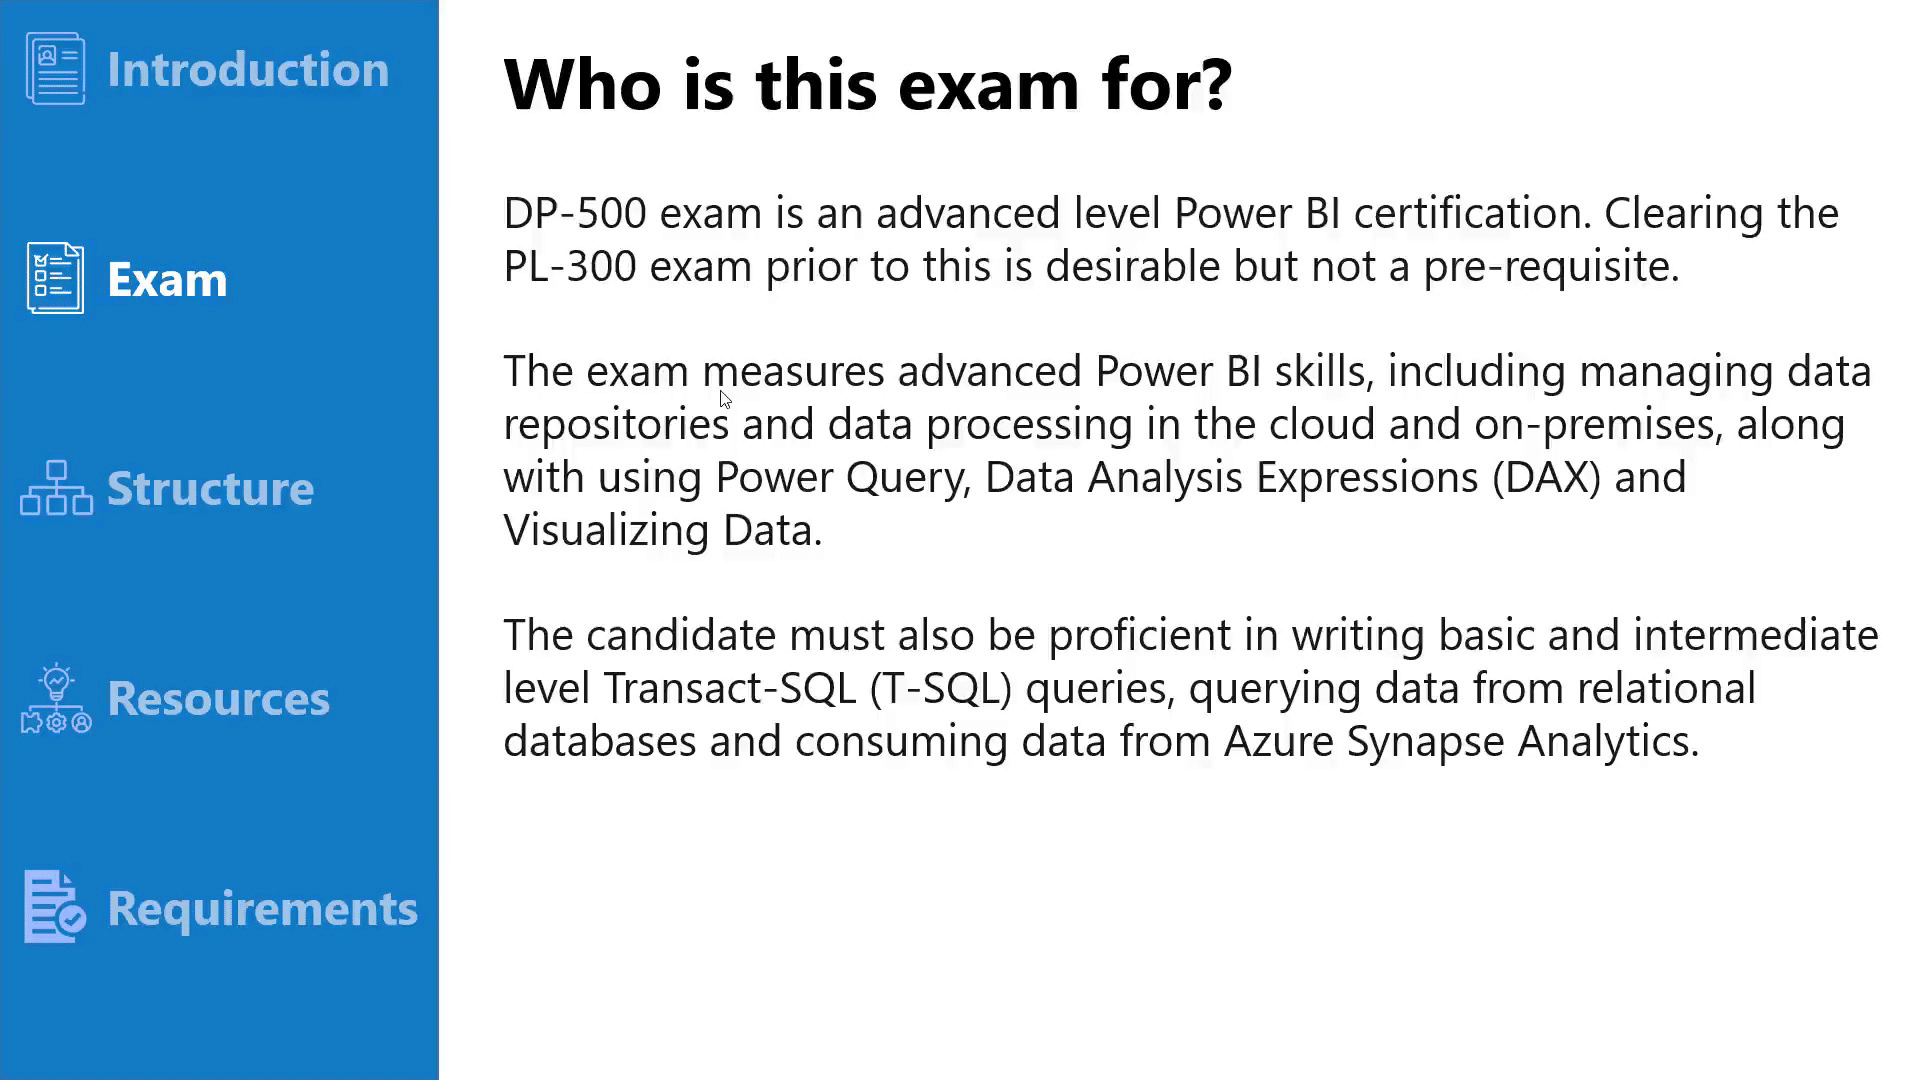 Who is the DP-500 exam for?